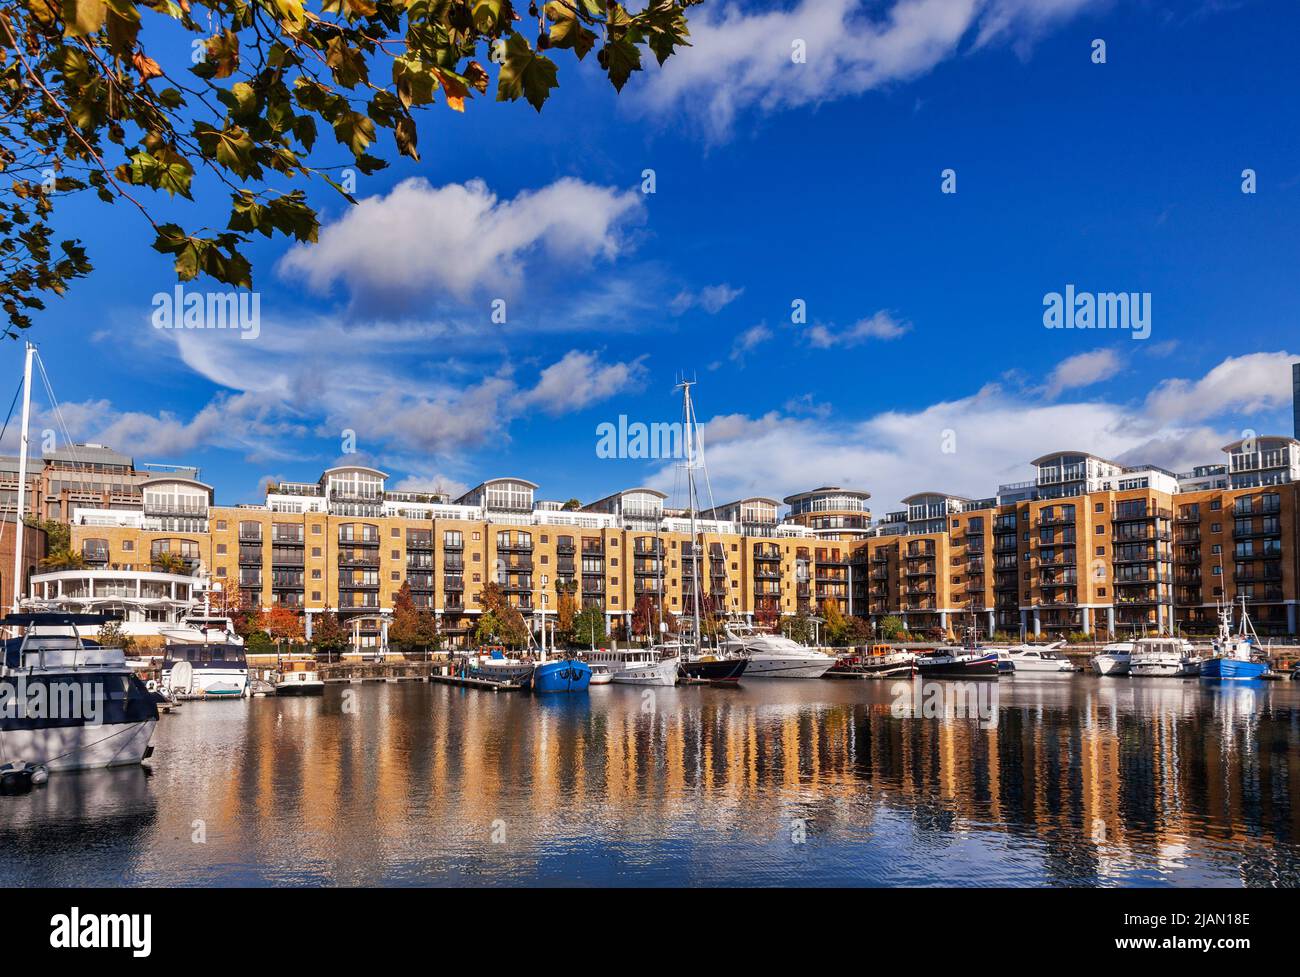 Luxury waterside housing and leisure complex with yachting marina at the St Katharine Docks, Tower Hamlets, East End, London, England, UK Stock Photo